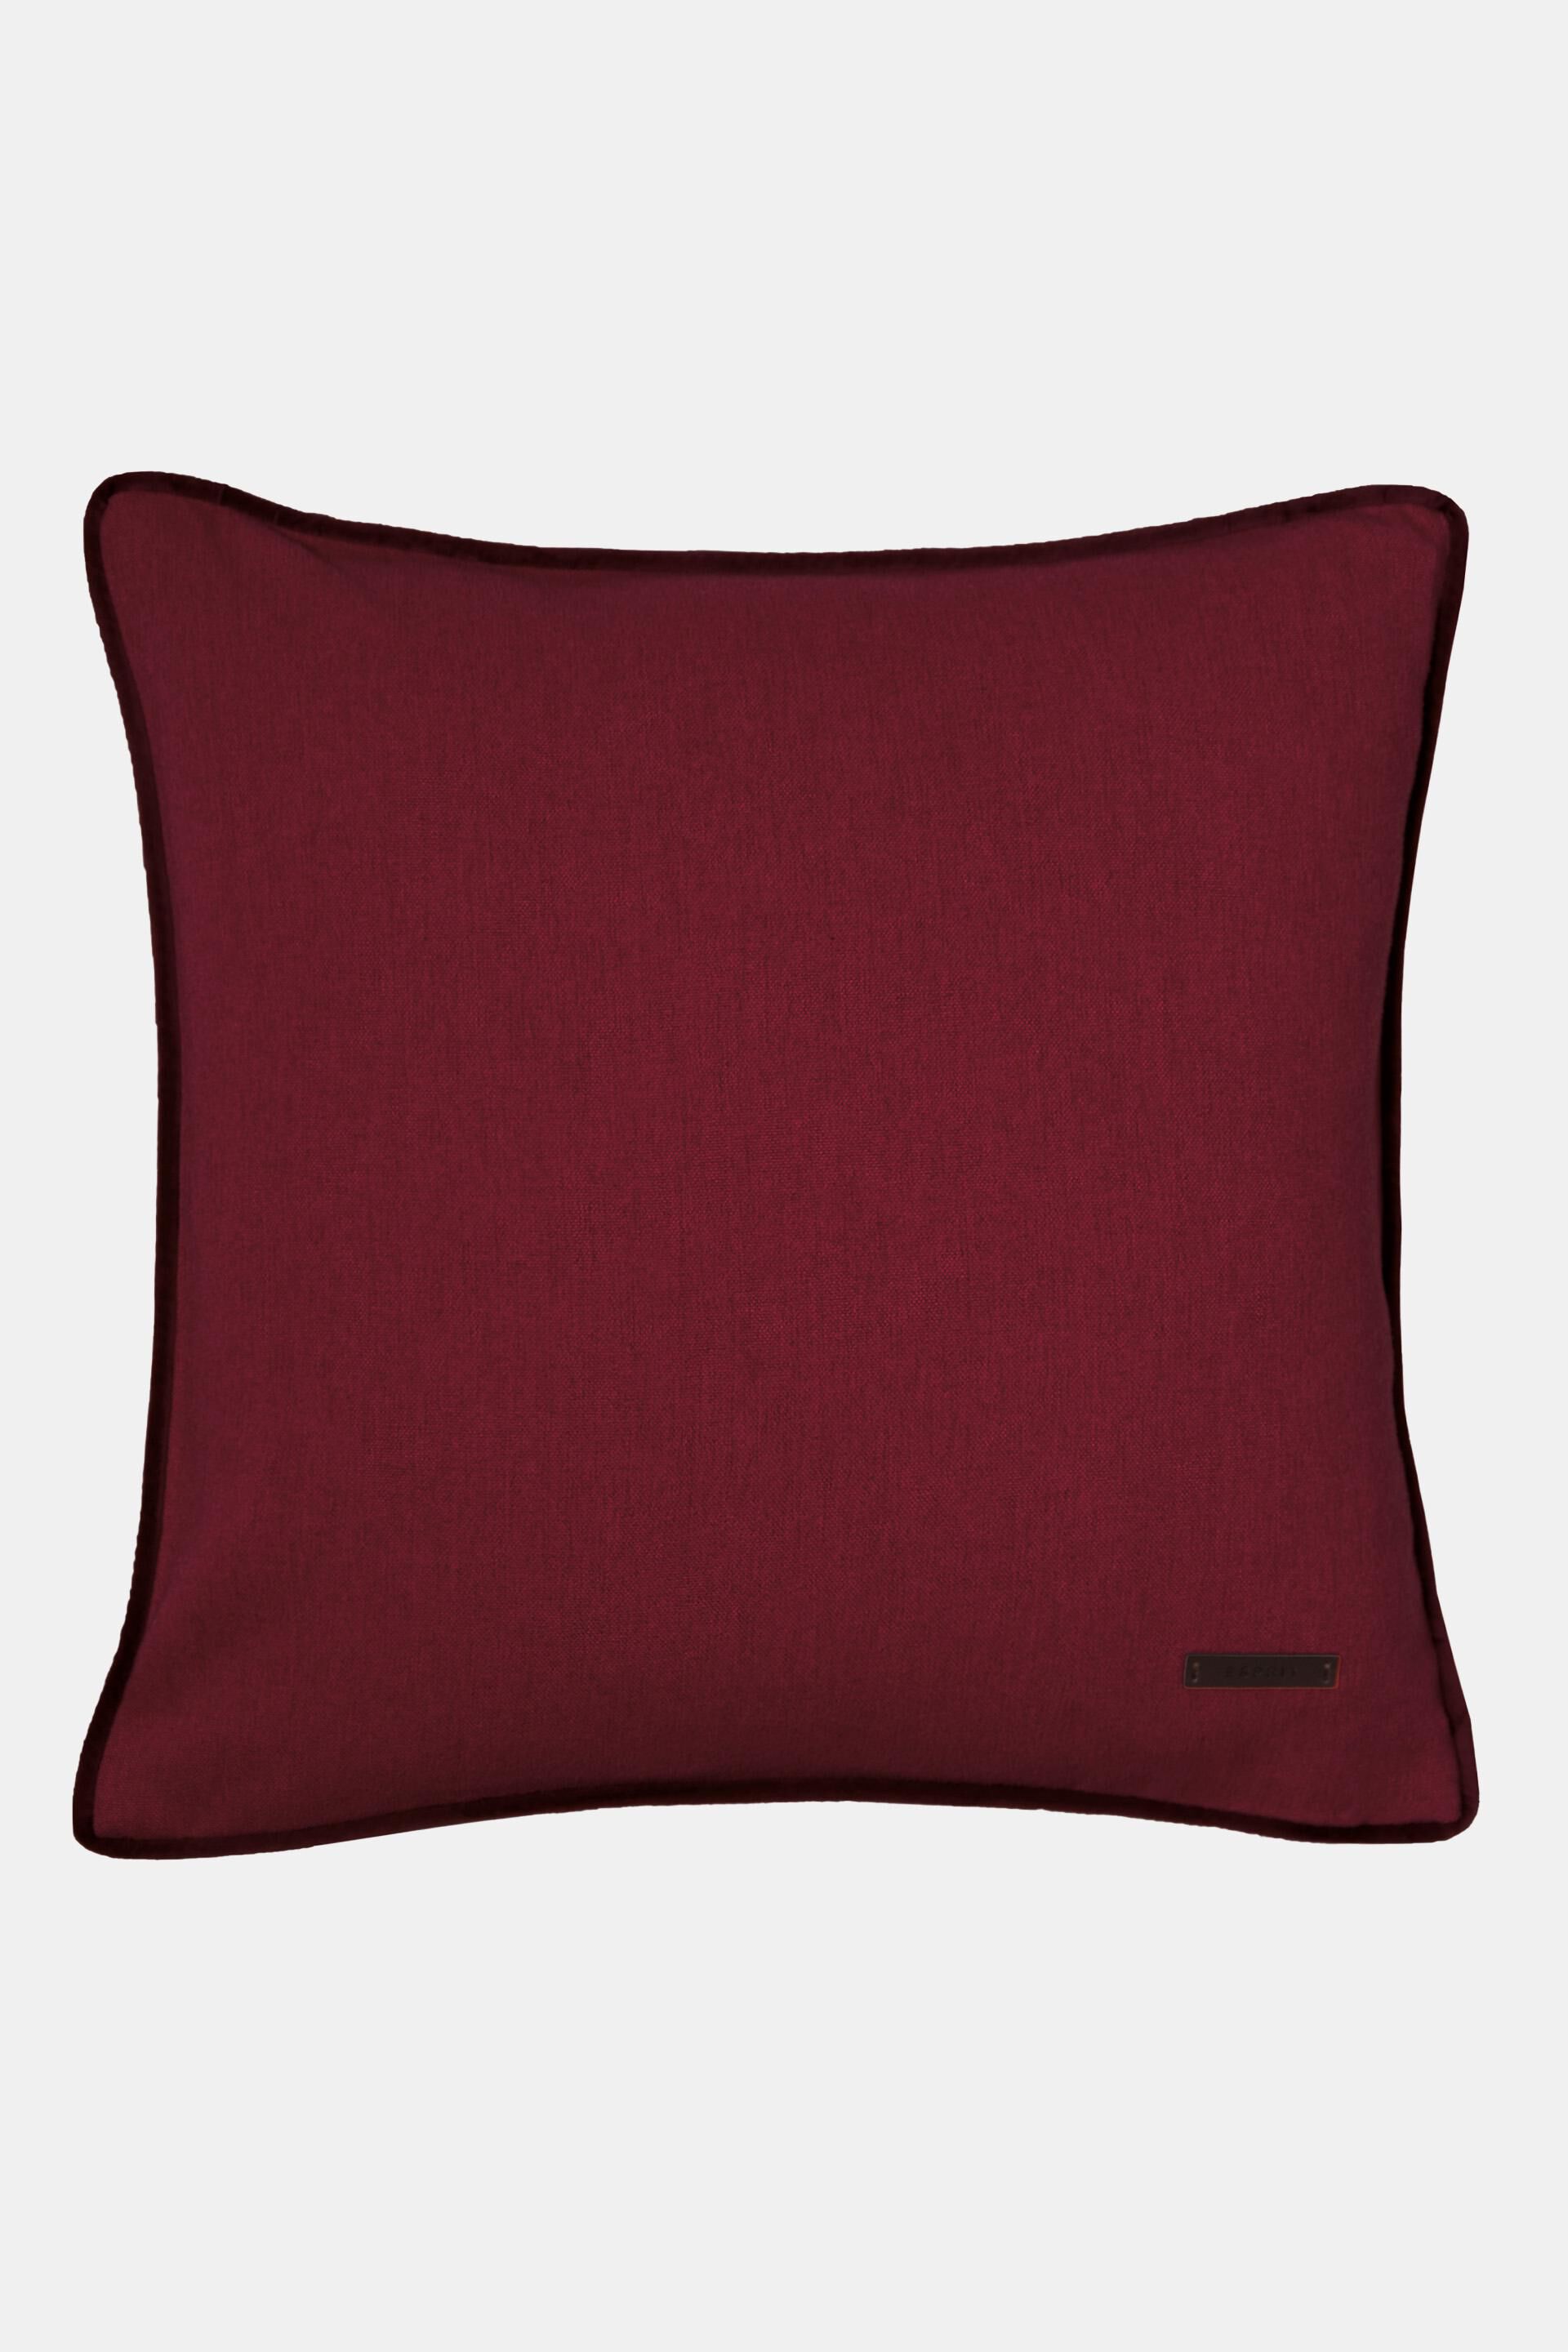 Esprit piping cushion Decorative with velvet cover